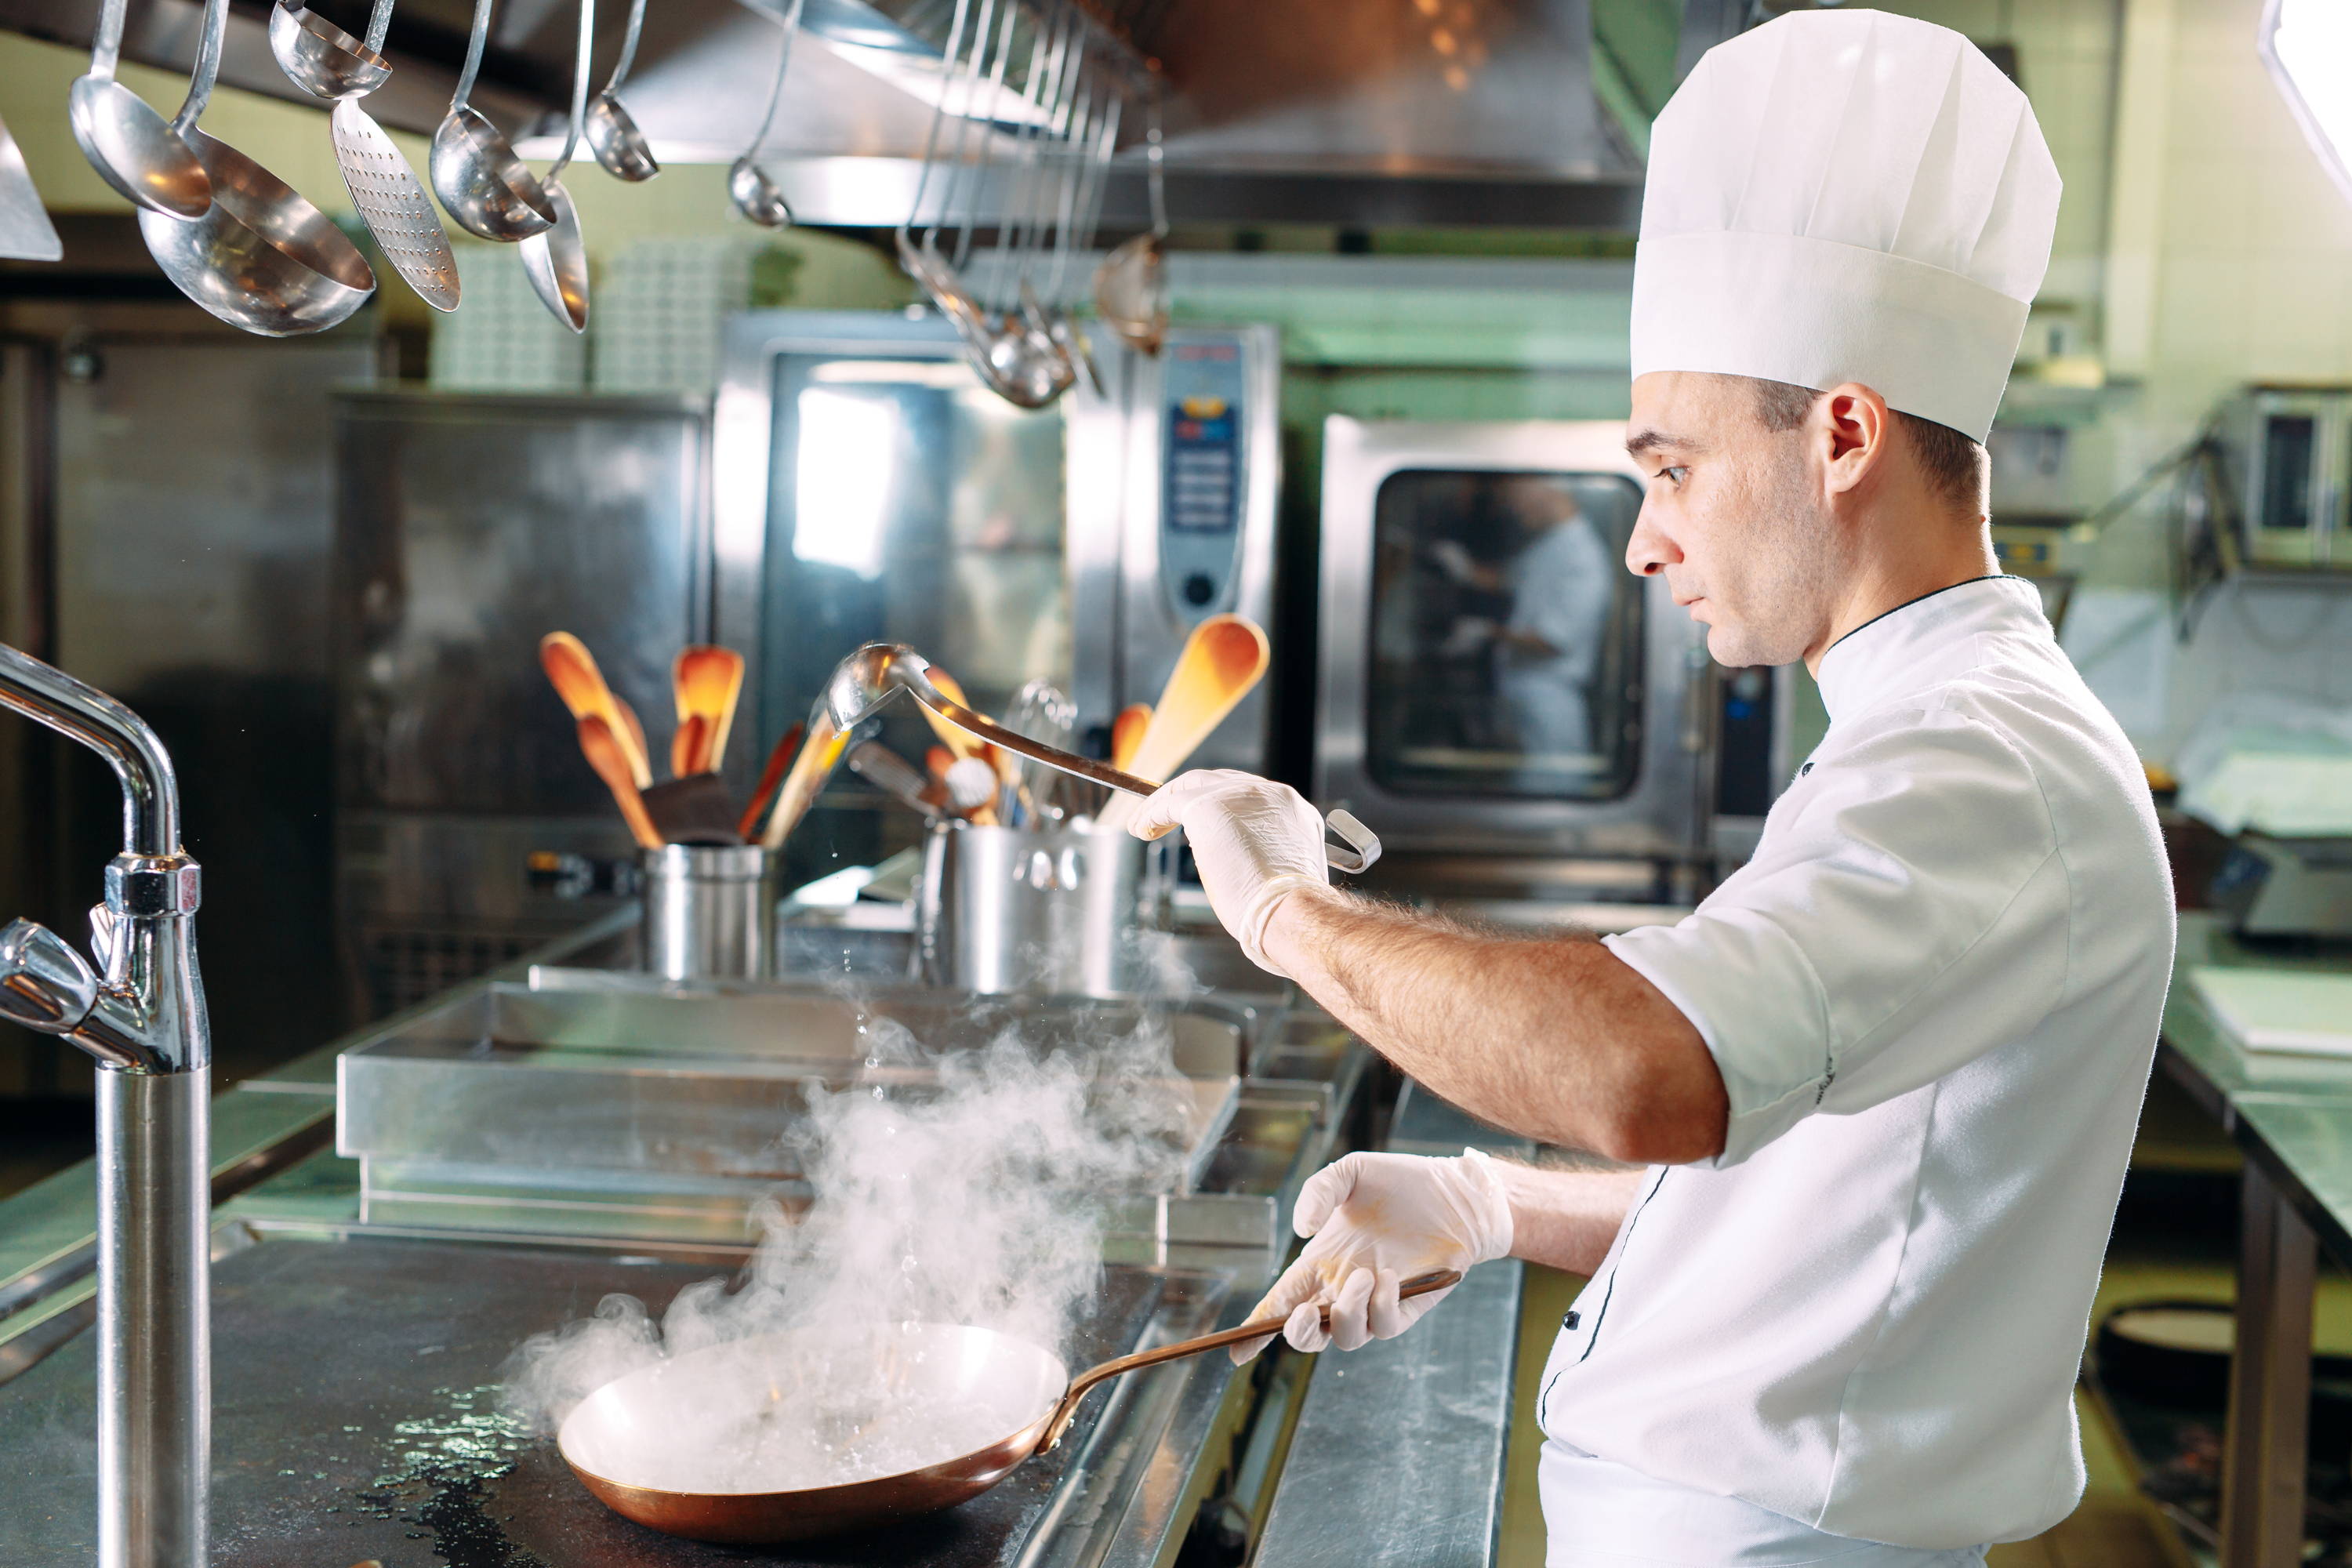 restaurants need clean safe water for cooking and serving